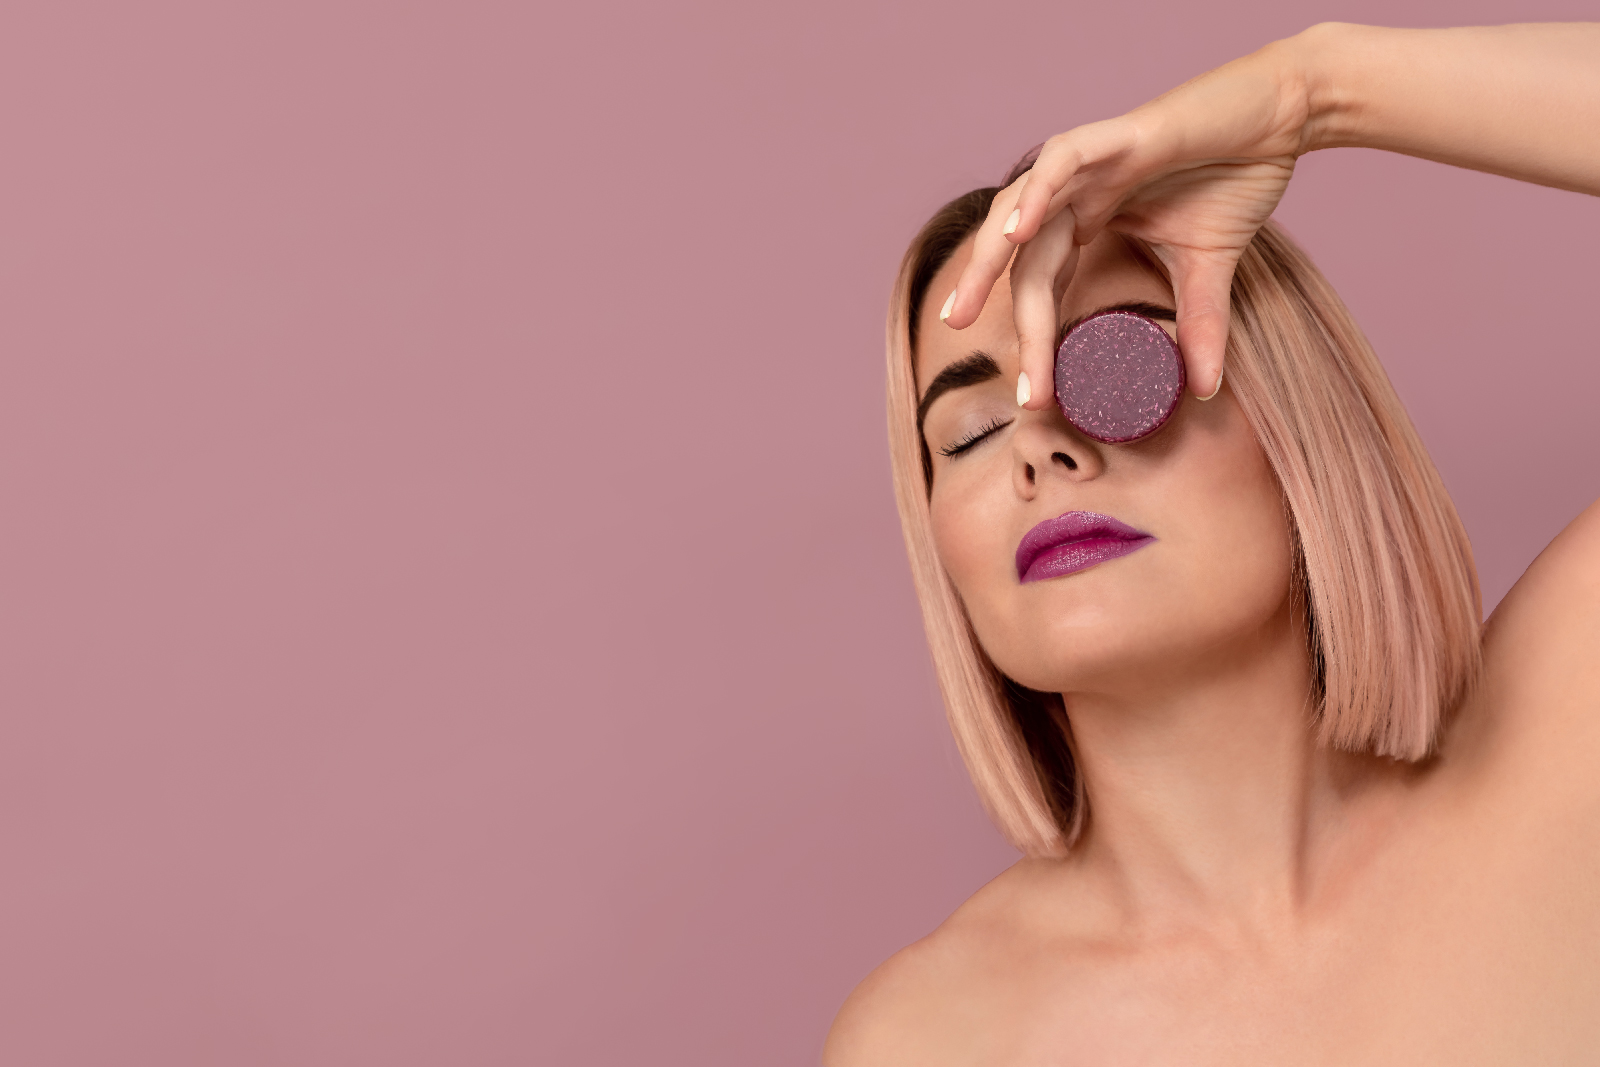 Beauty photoshoot featuring a young woman and a cosmetic container represented on a purple background.